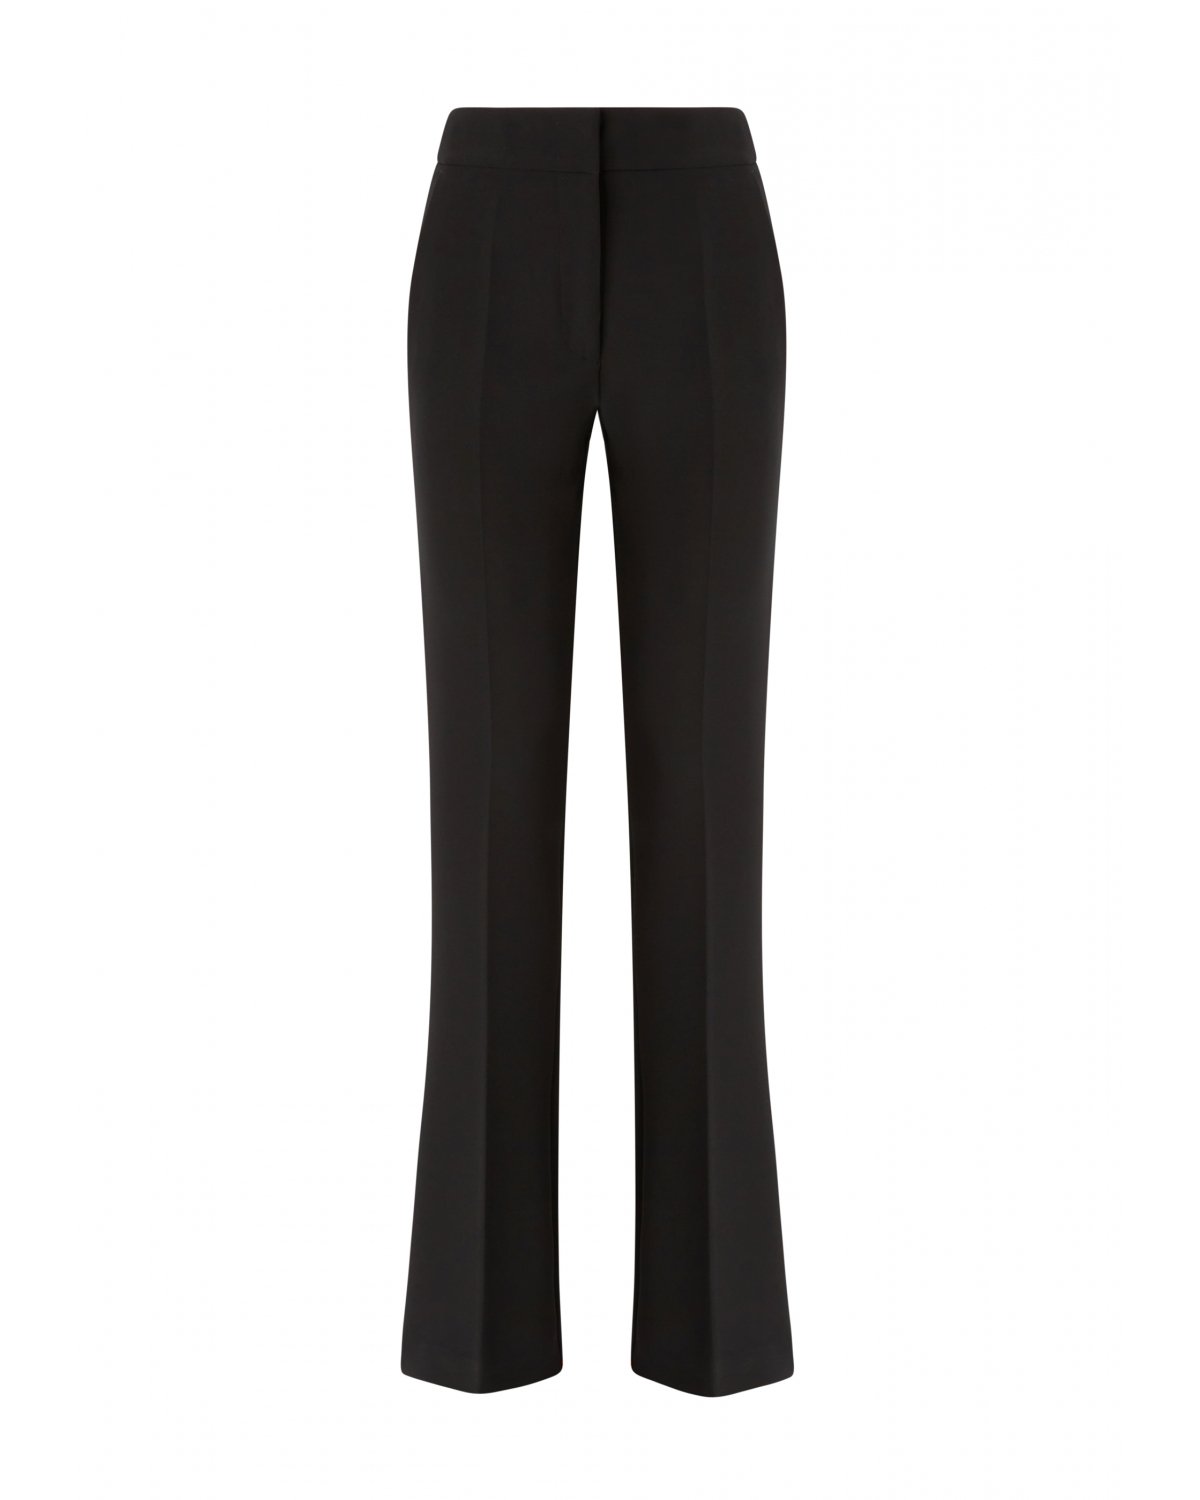 Black tight trousers | 73_74 | Genny